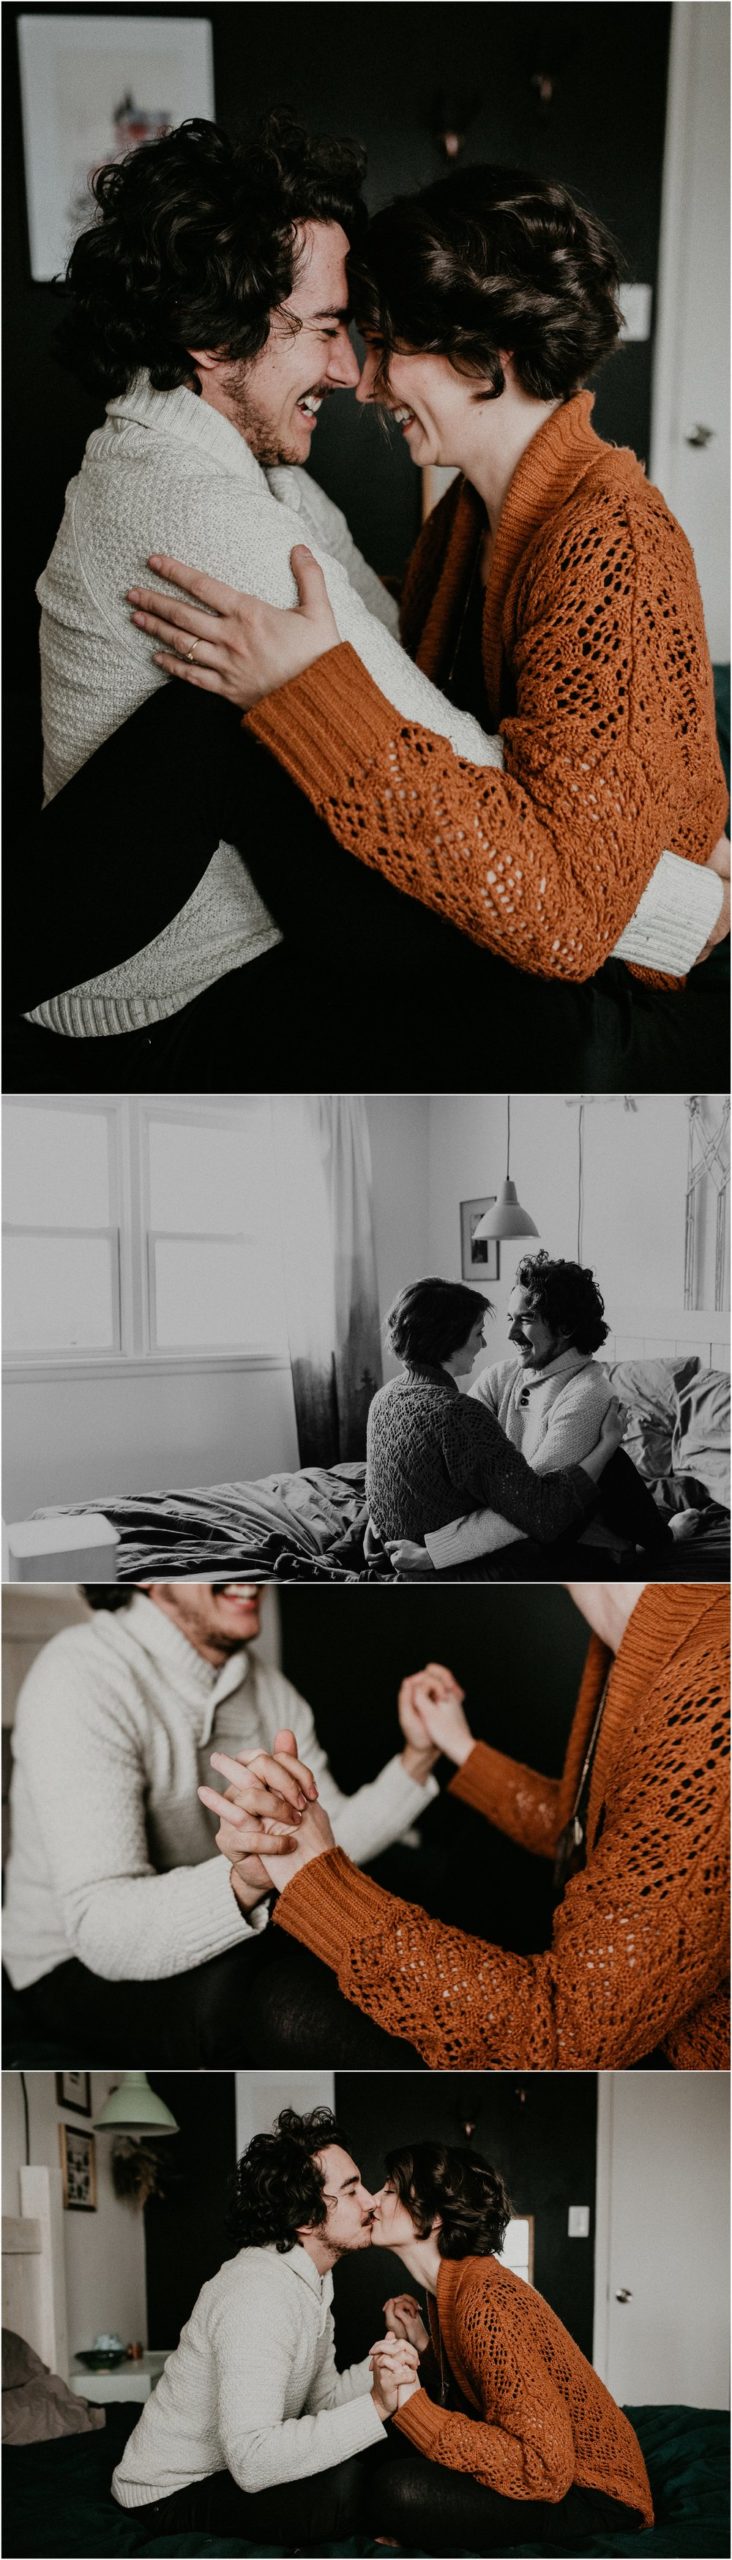 Boise Engagement Wedding Photographer Lifestyle Couples Session In home Dogs Christmas Winter Laughter Love Kissing